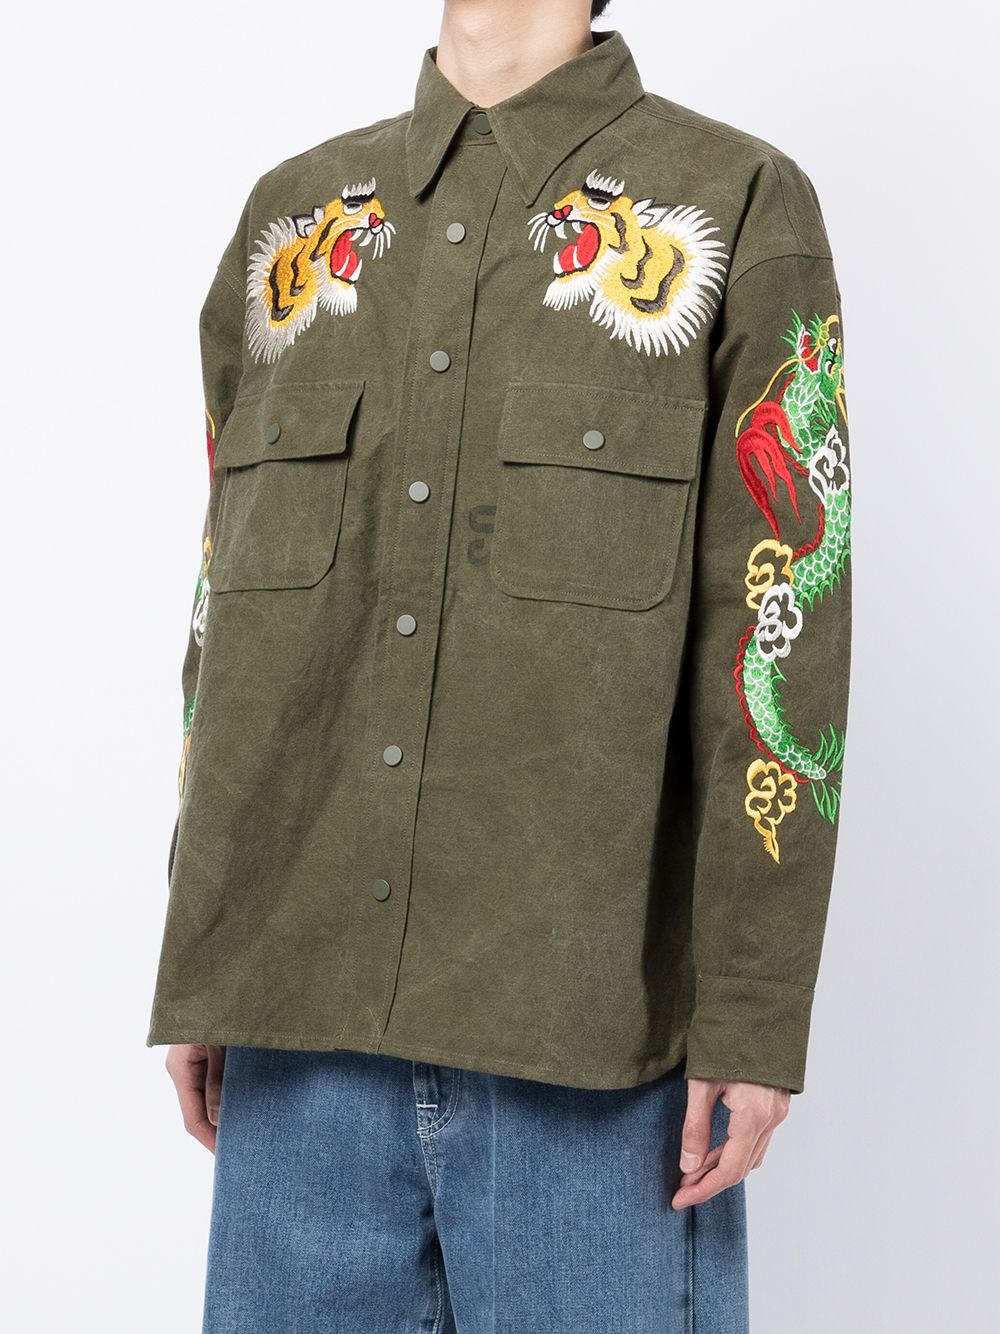 embroidered shirt jacket - 3